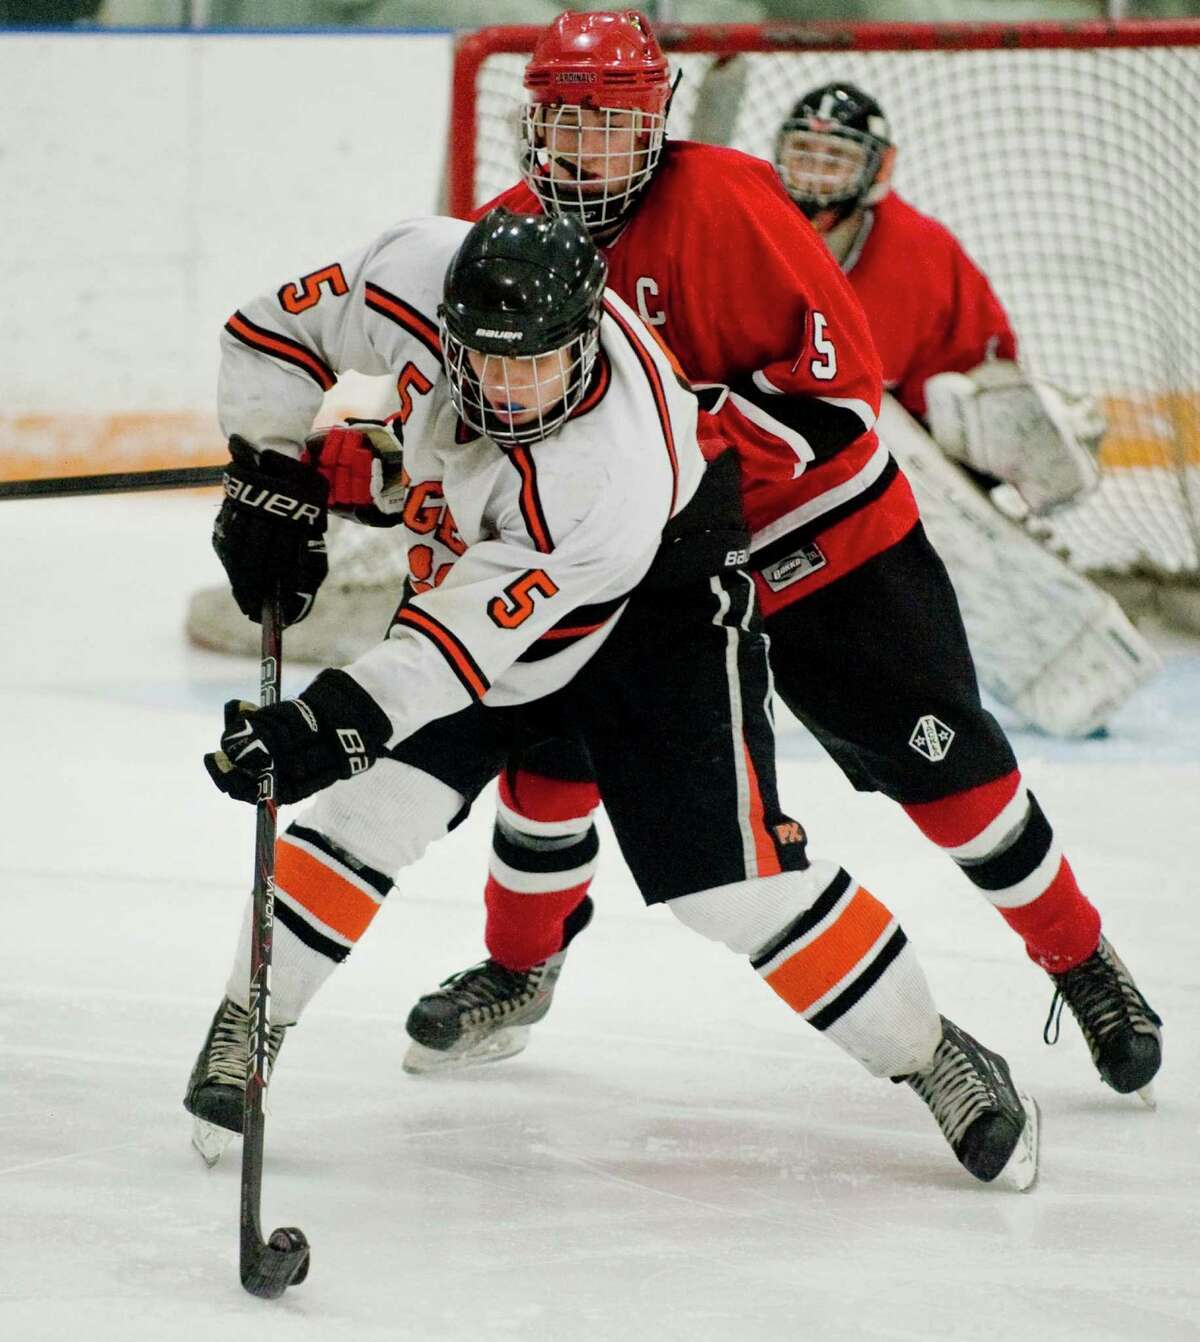 Ridgefield High School's Alex Rowella tries to manuver the puck away from Greenwich High School's Reed Brady during the division I boys ice hockey playoffs at Ridgefield. Mar. 6, 2013